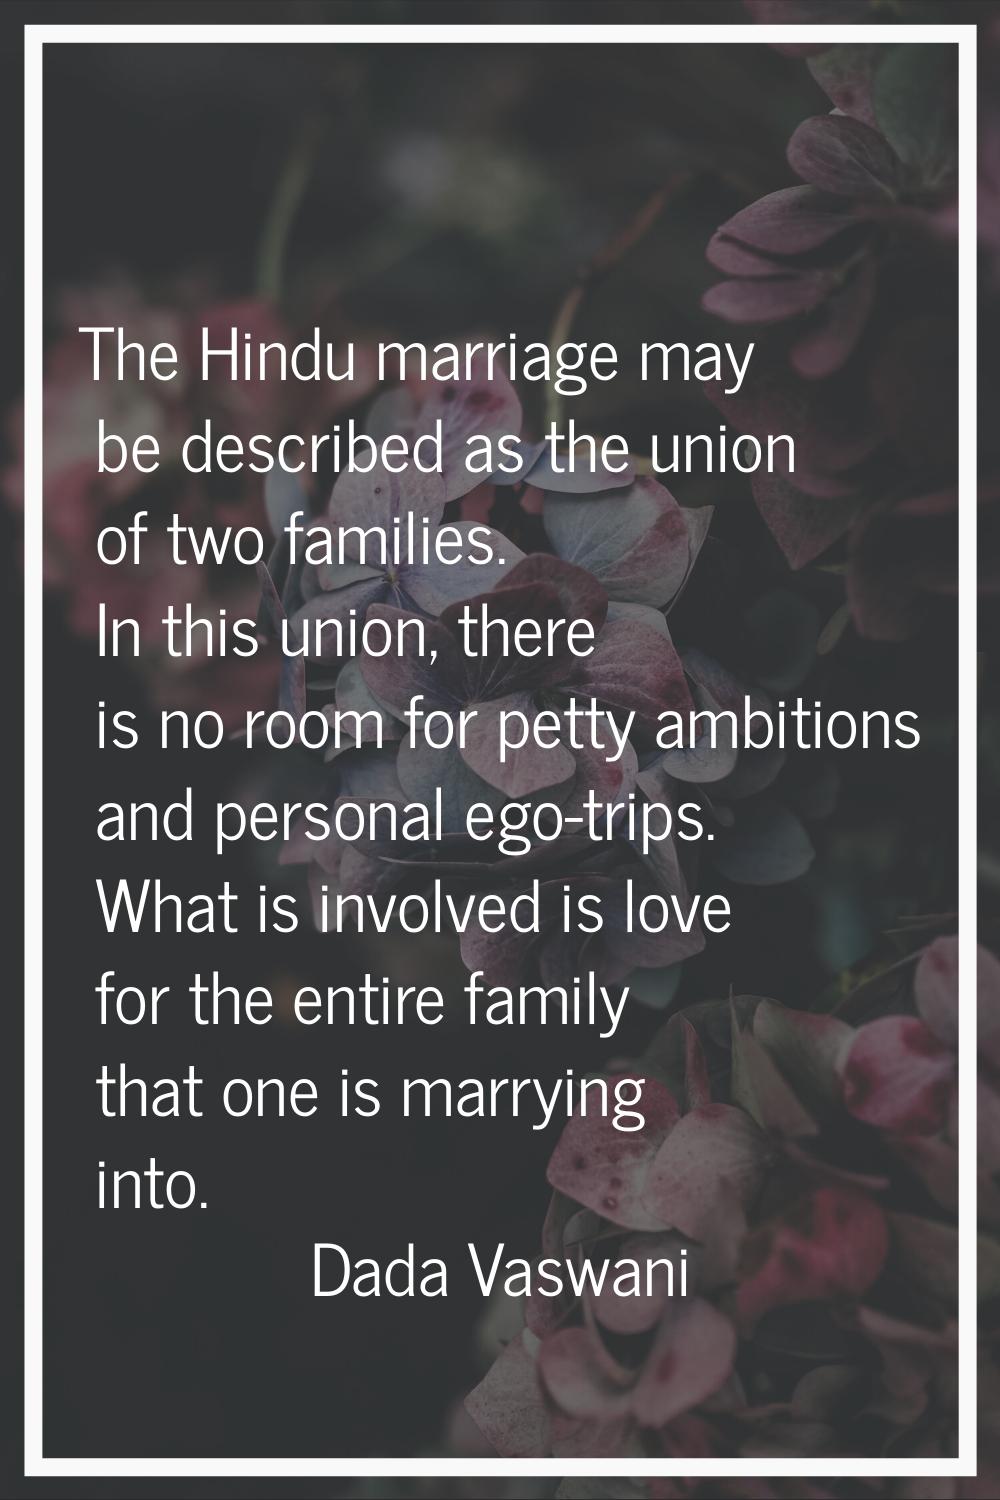 The Hindu marriage may be described as the union of two families. In this union, there is no room f